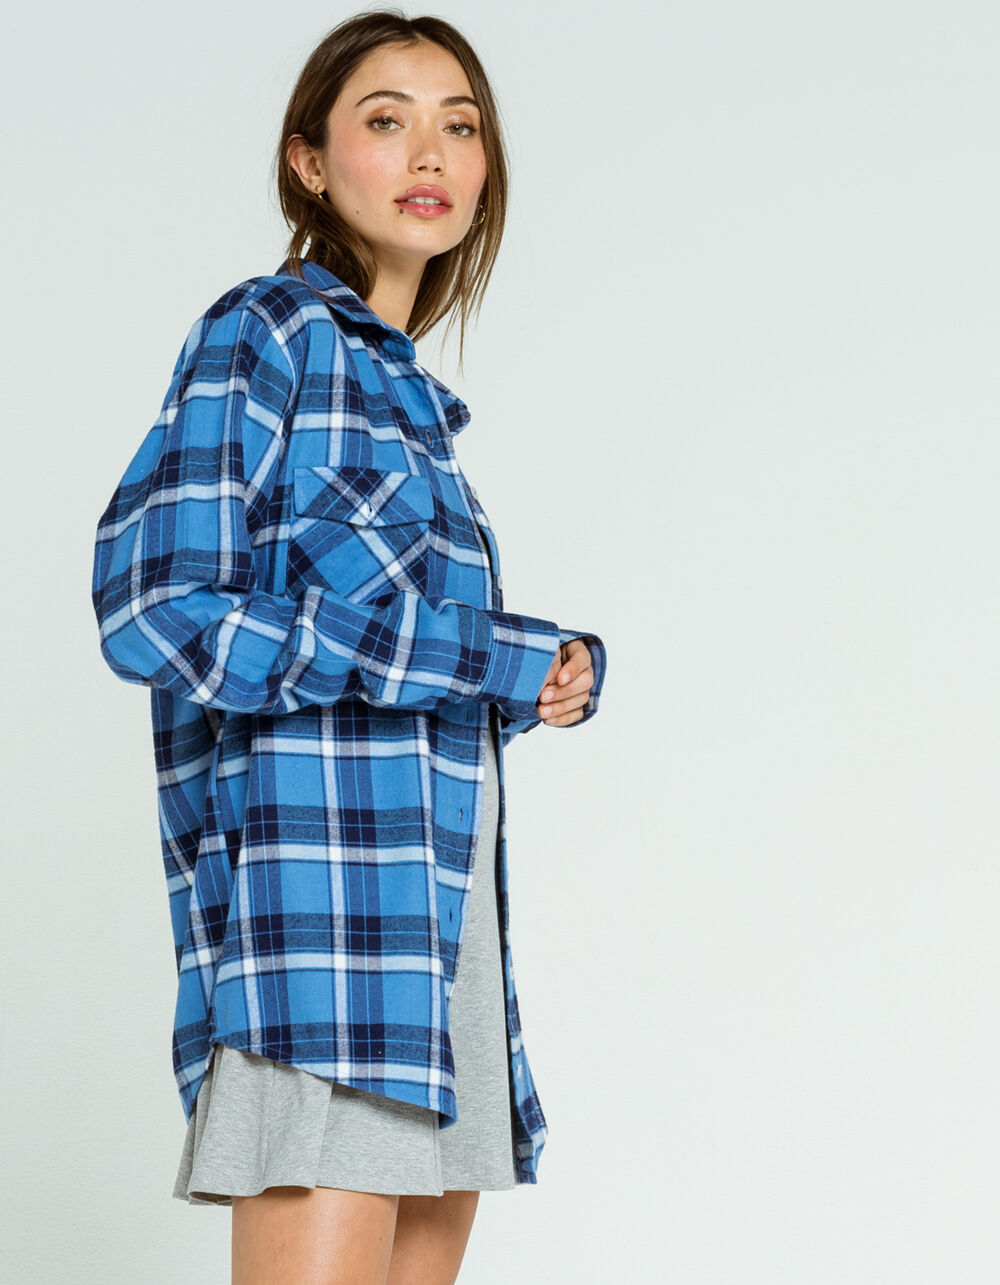 RSQ Collective Plaid Womens Flannel Shirt - BLUE COMBO | Tillys